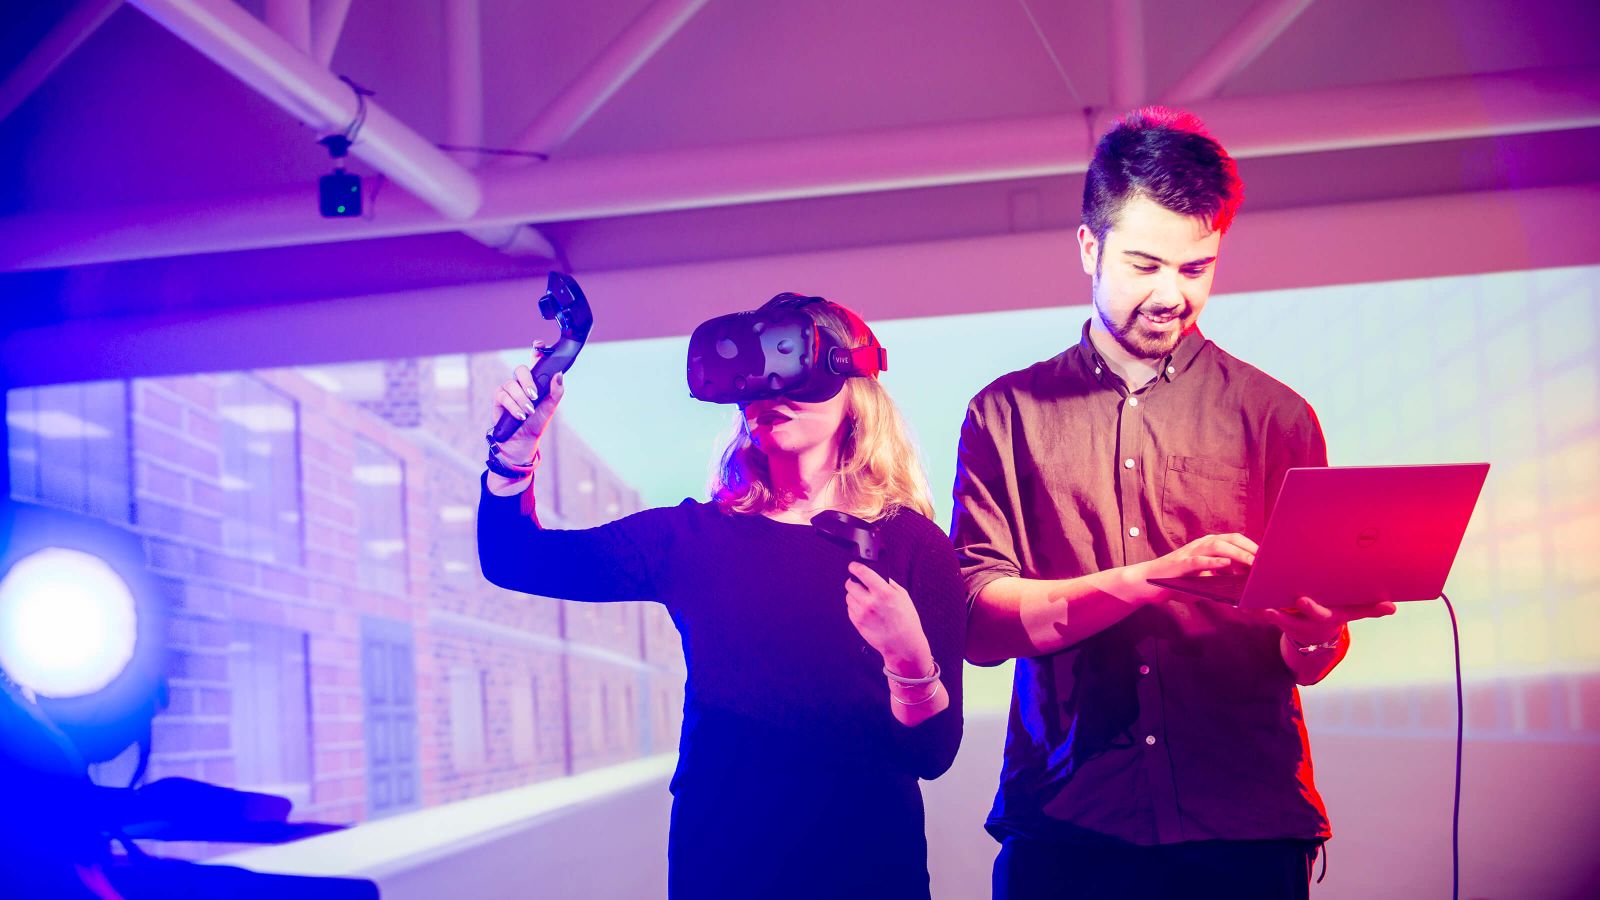 In a room lit by blue and purple lights, a man holds a laptop and types with one hand, and a woman uses virtual reality goggles and a controller.